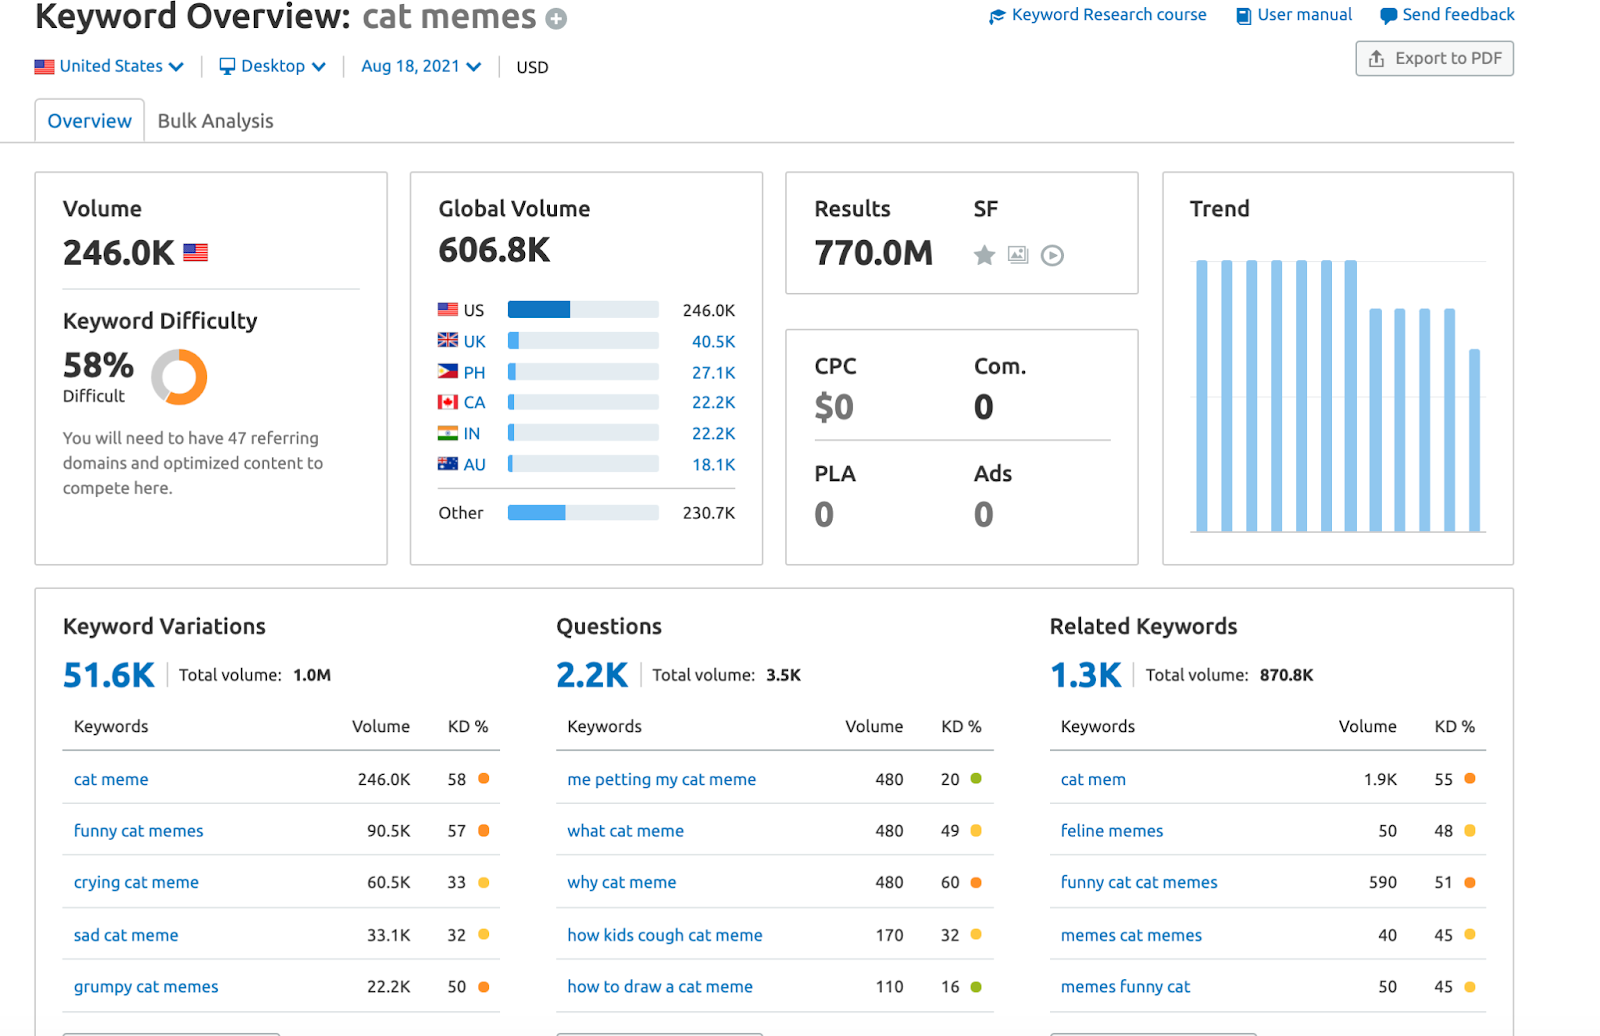 Keyword Overview tool results for cat memes